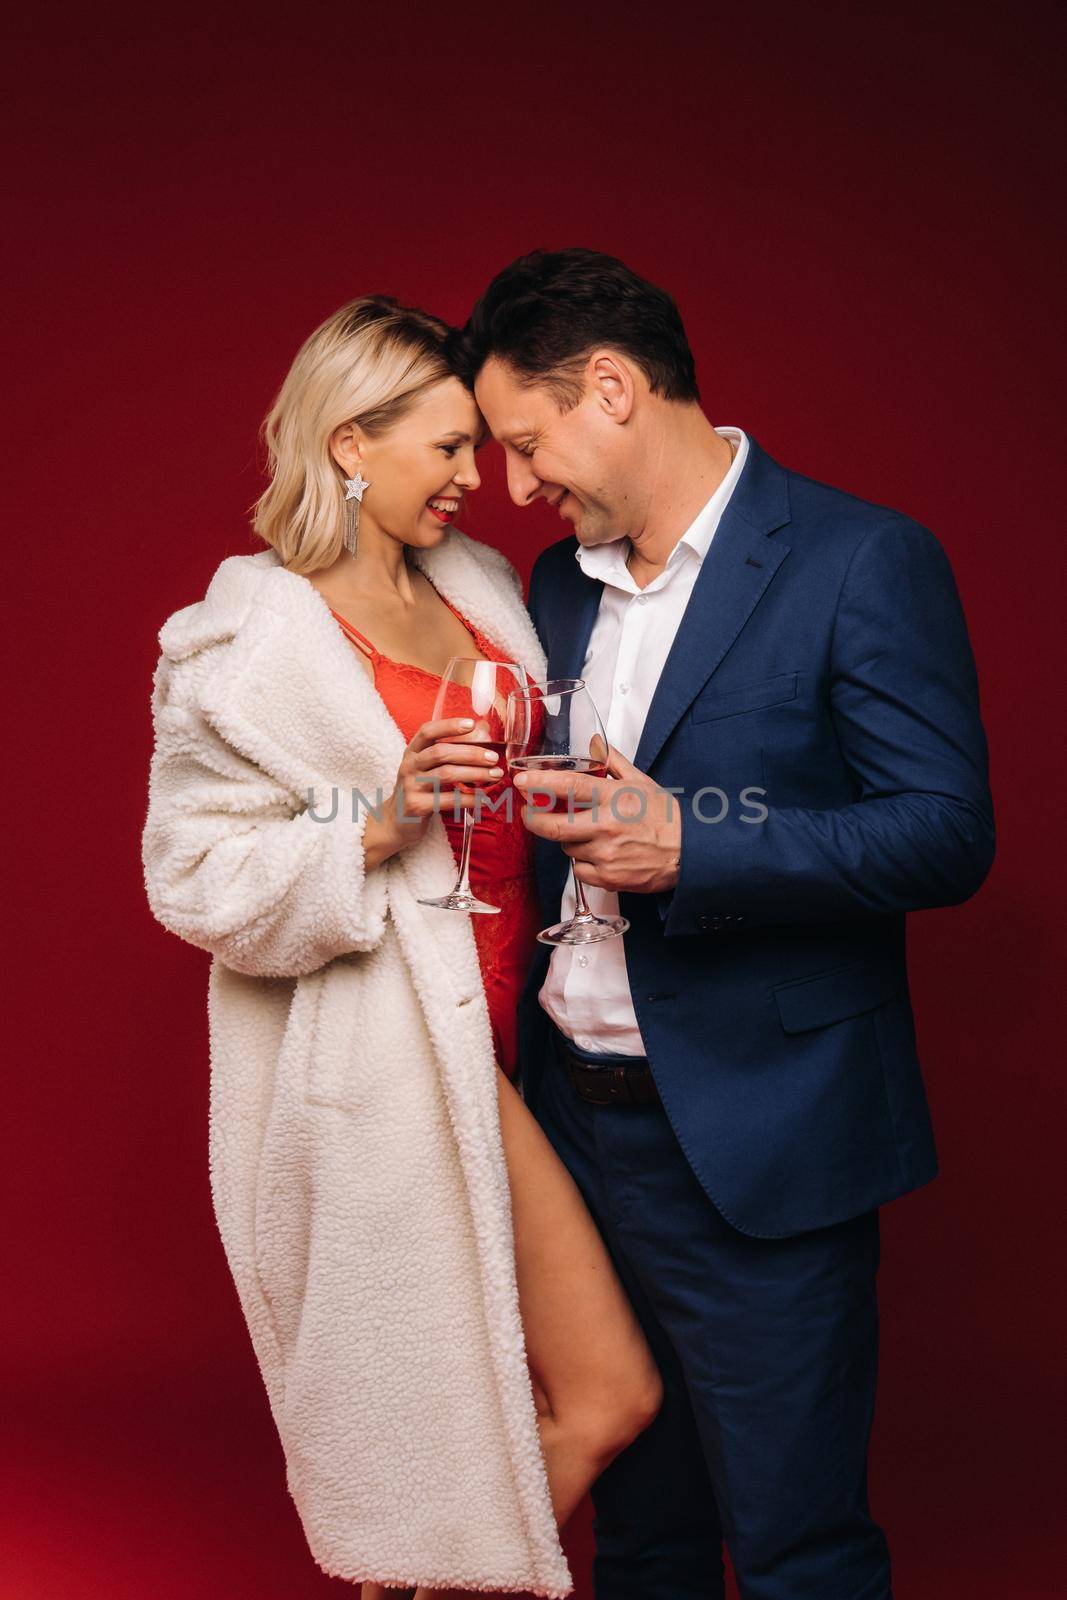 A man and a woman in love with a glass of champagne on a red background embrace.